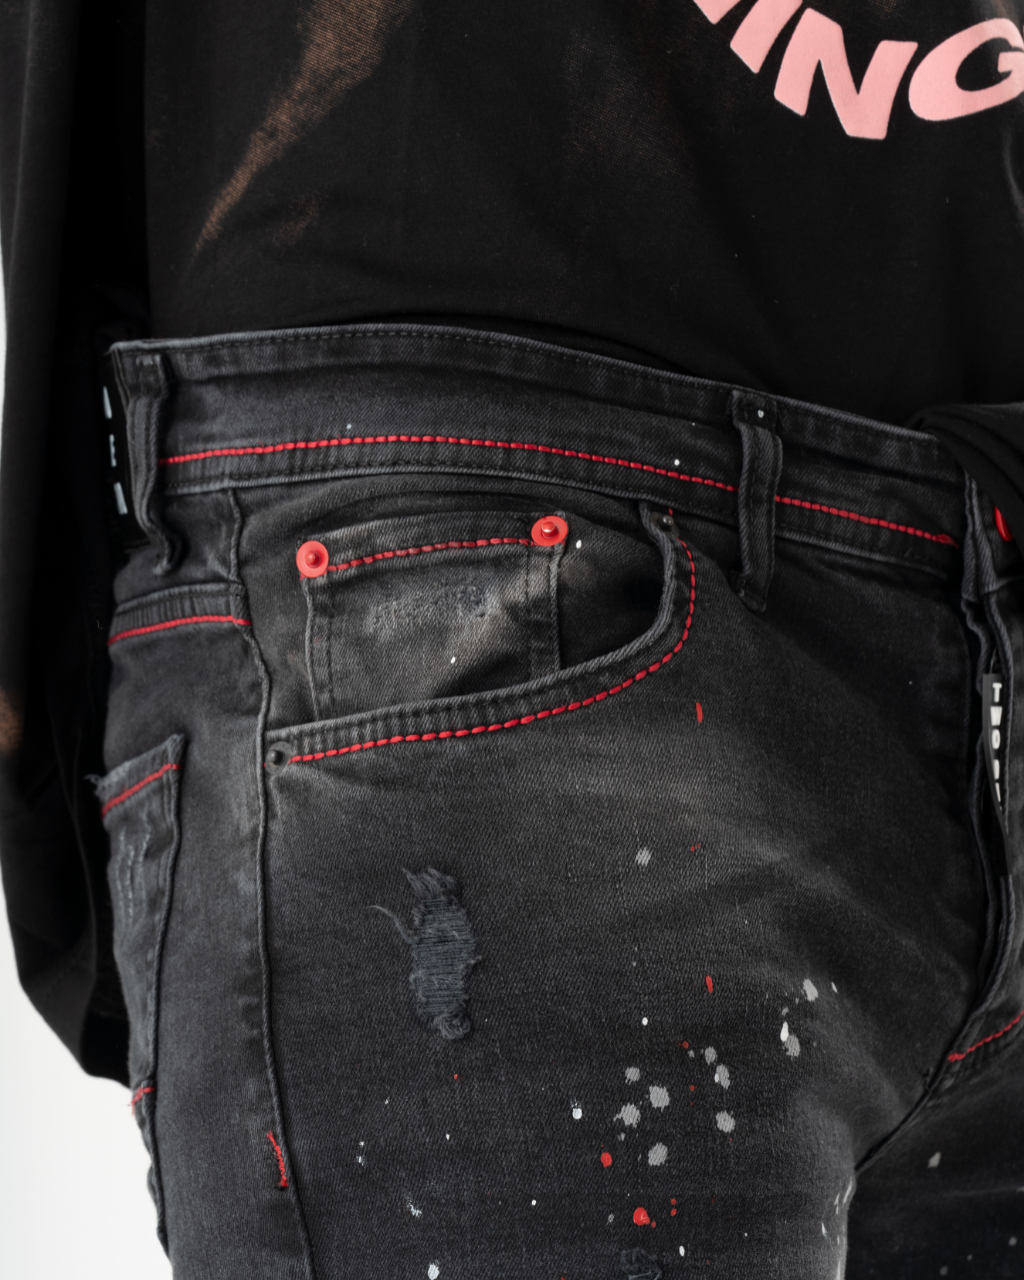 The back of a man's ripped black jeans with red paint splatters.